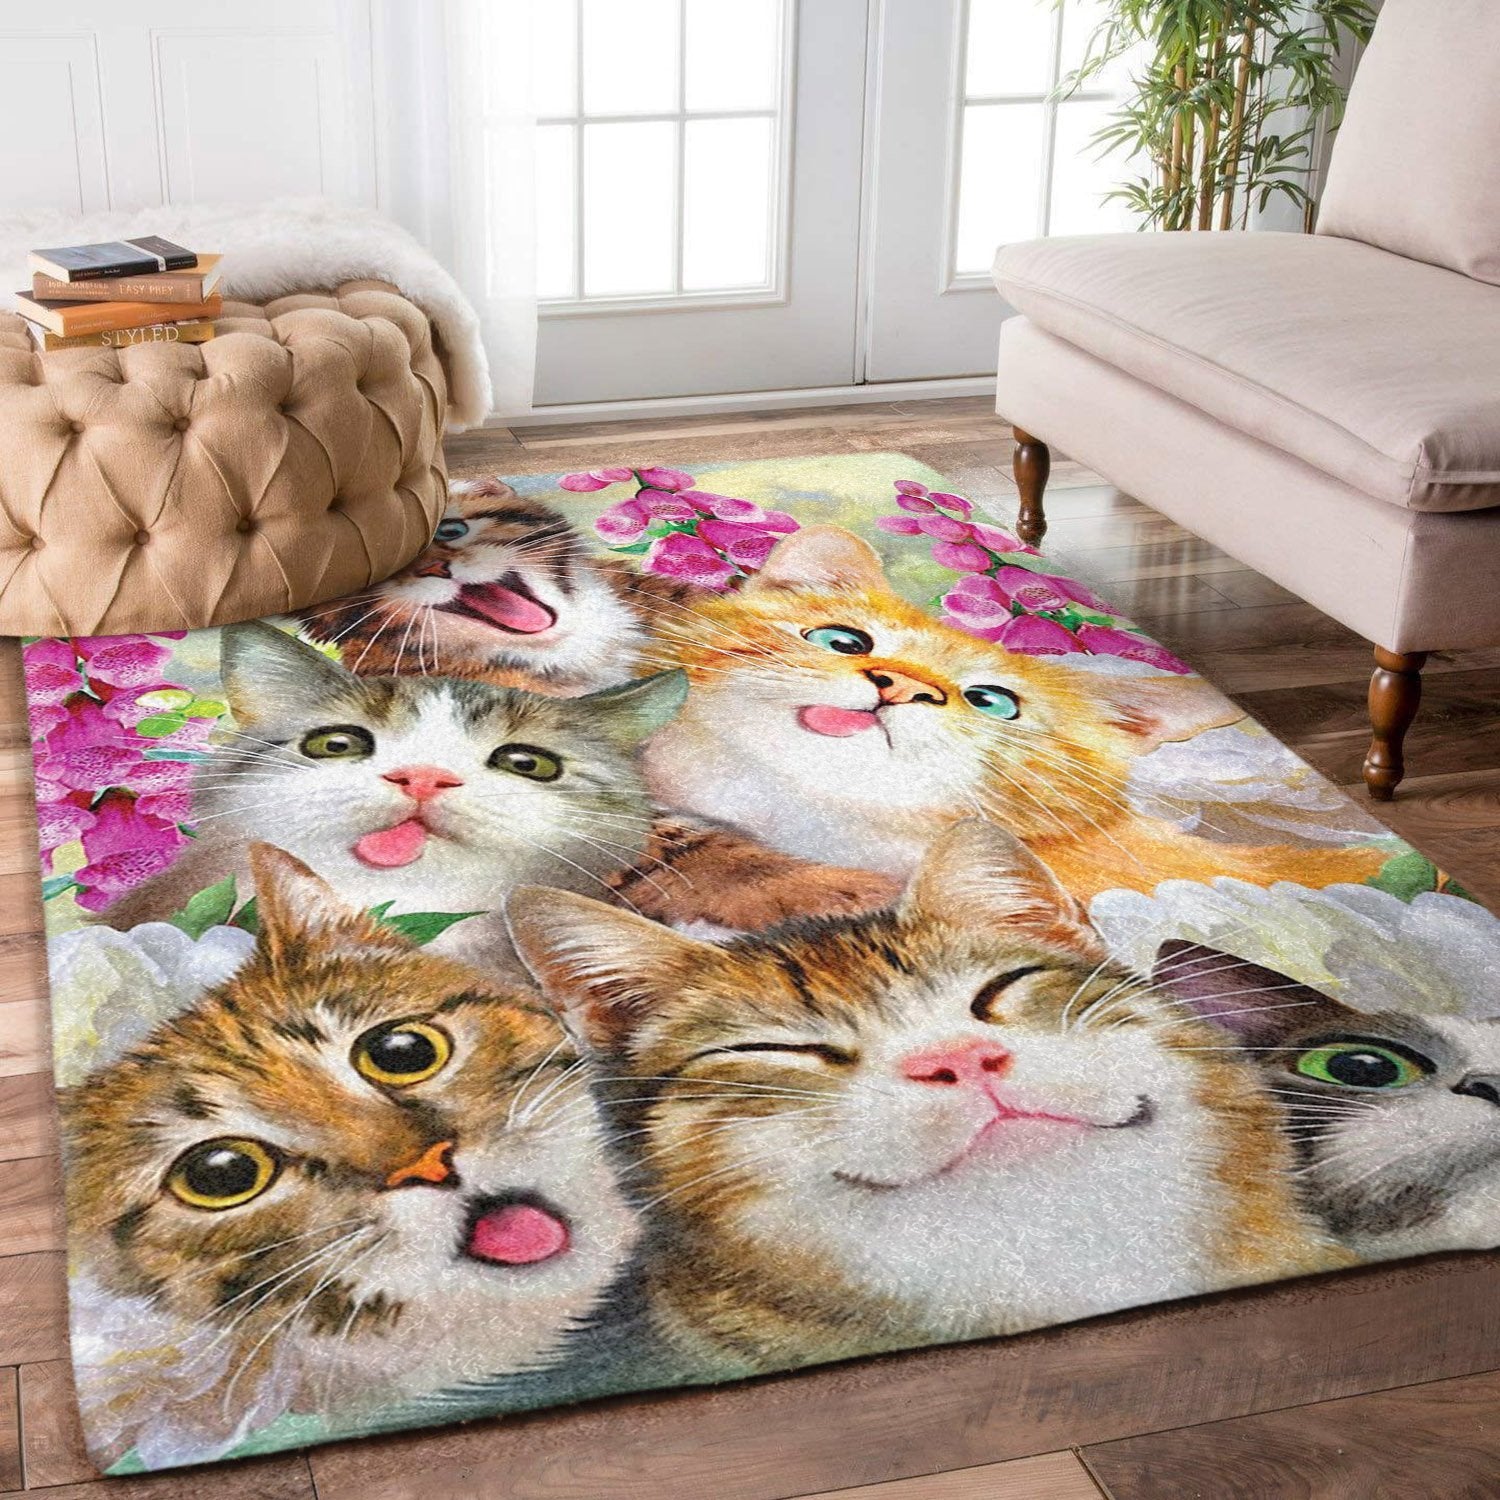 Best rug runner if you have cats - jopbr